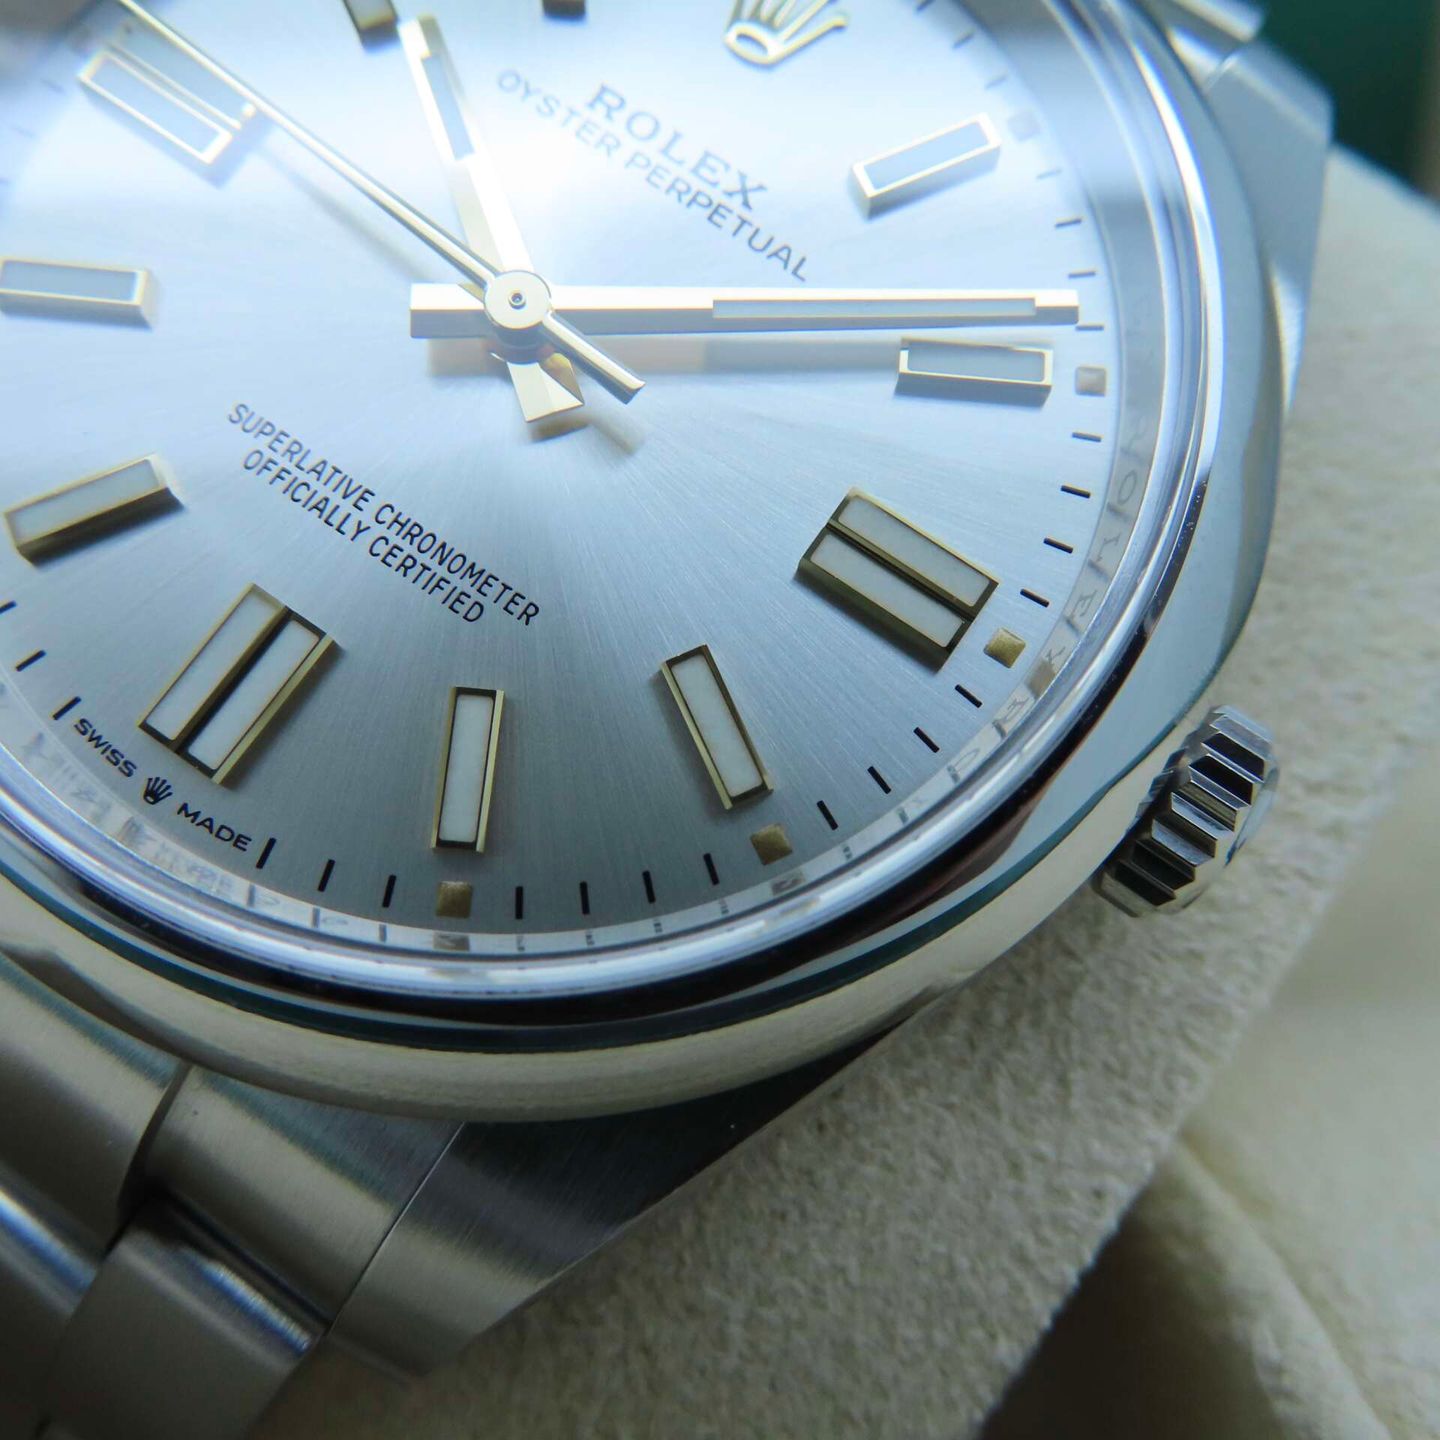 Rolex Oyster Perpetual 41 124300 - (7/7)